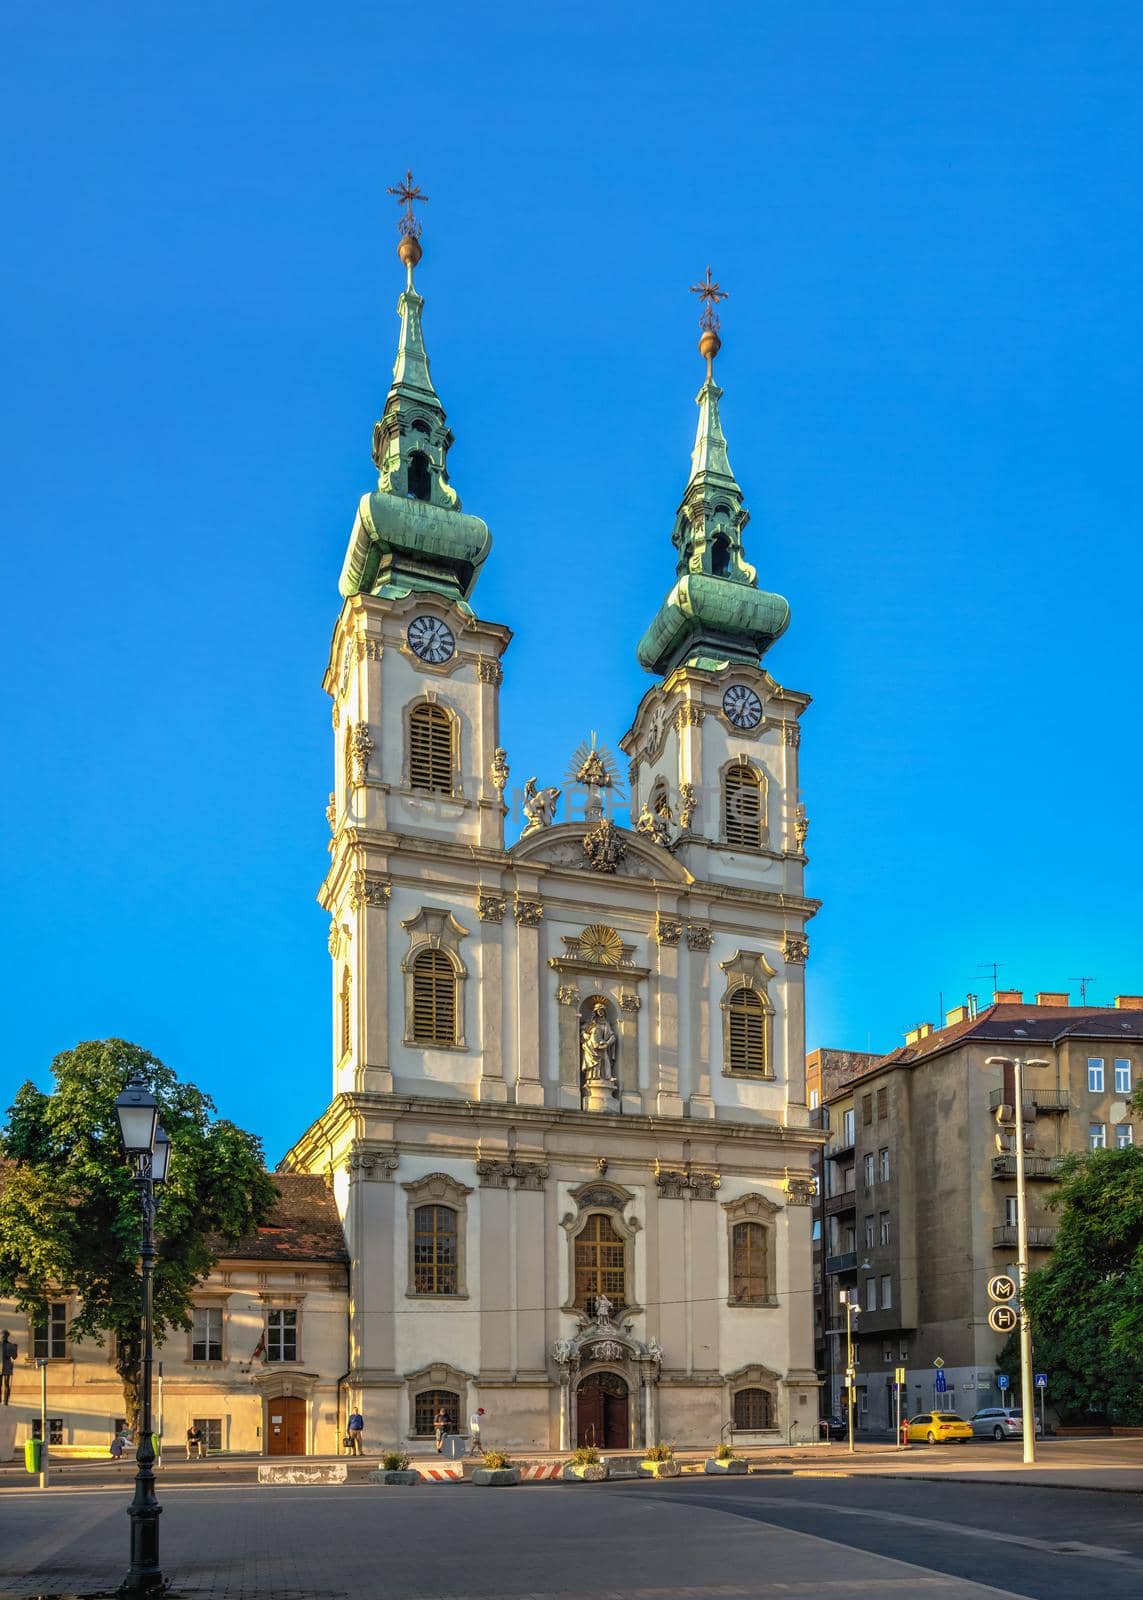 Church of st. Anna in Budapest, Hungary by Multipedia